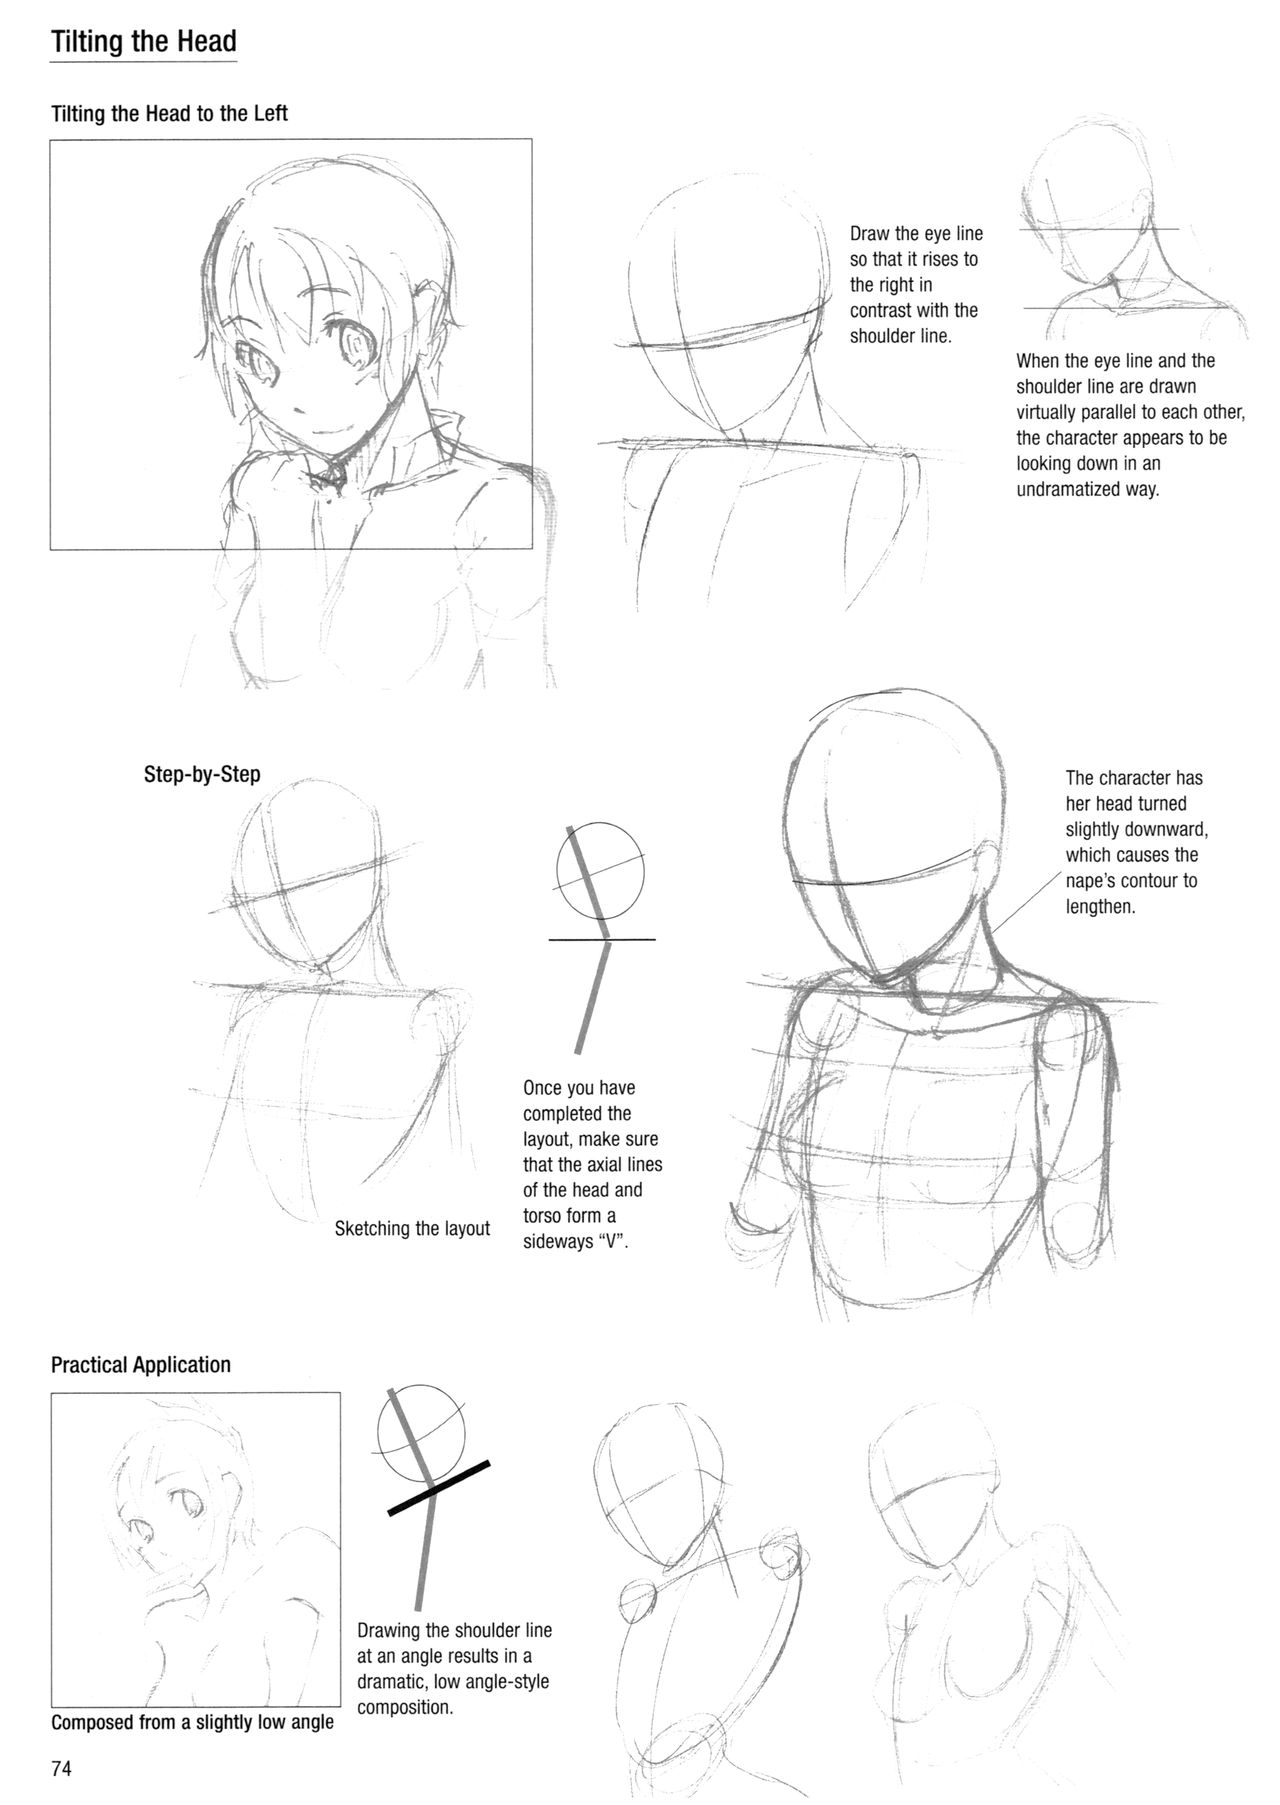 Sketching Manga-Style Vol. 3 - Unforgettable Characters 73